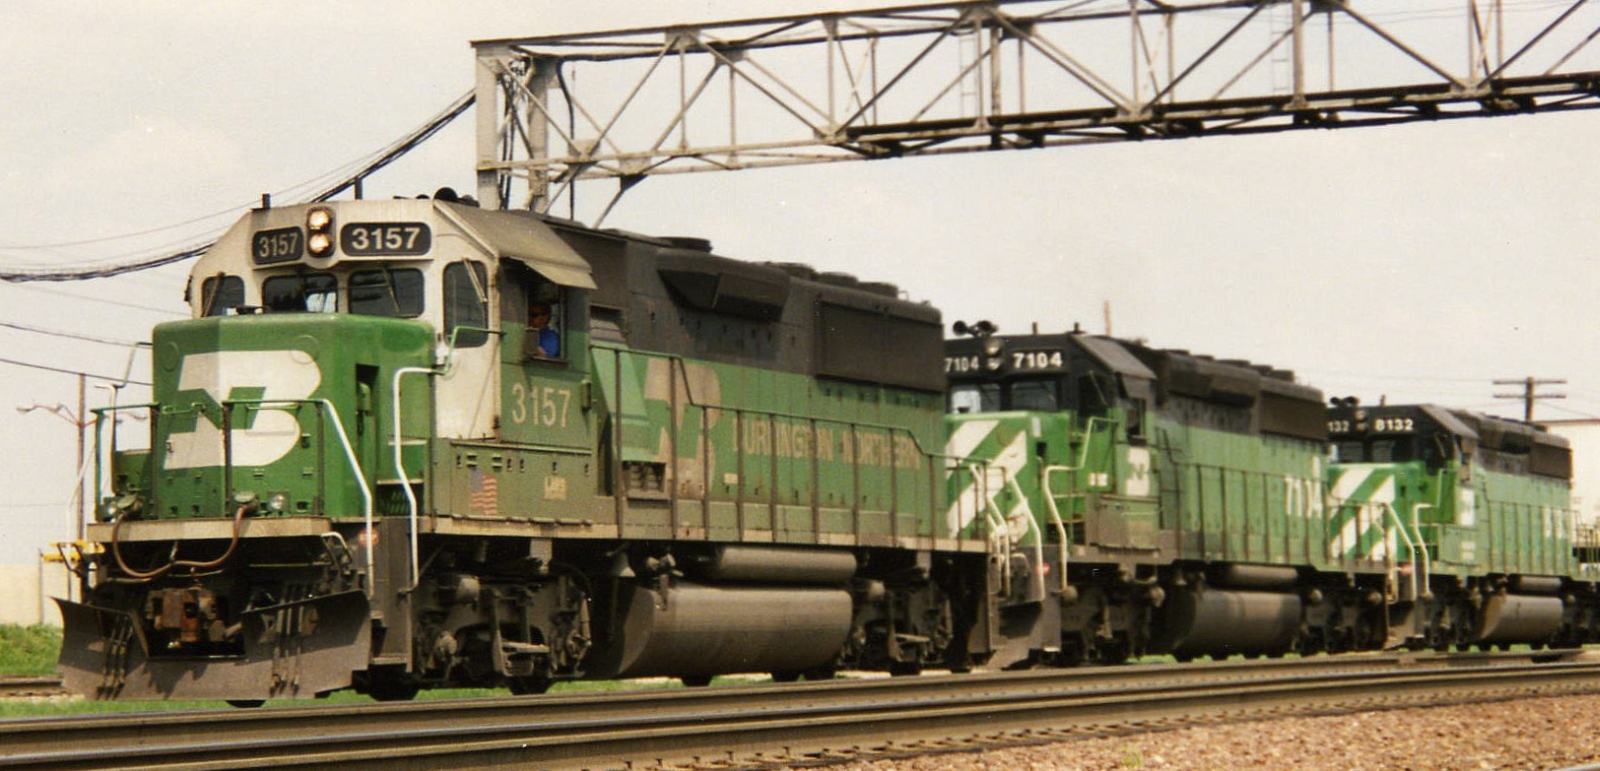 Burlington Northern No. 3157 in front of a freight train in June 2005 Eola, Illinois